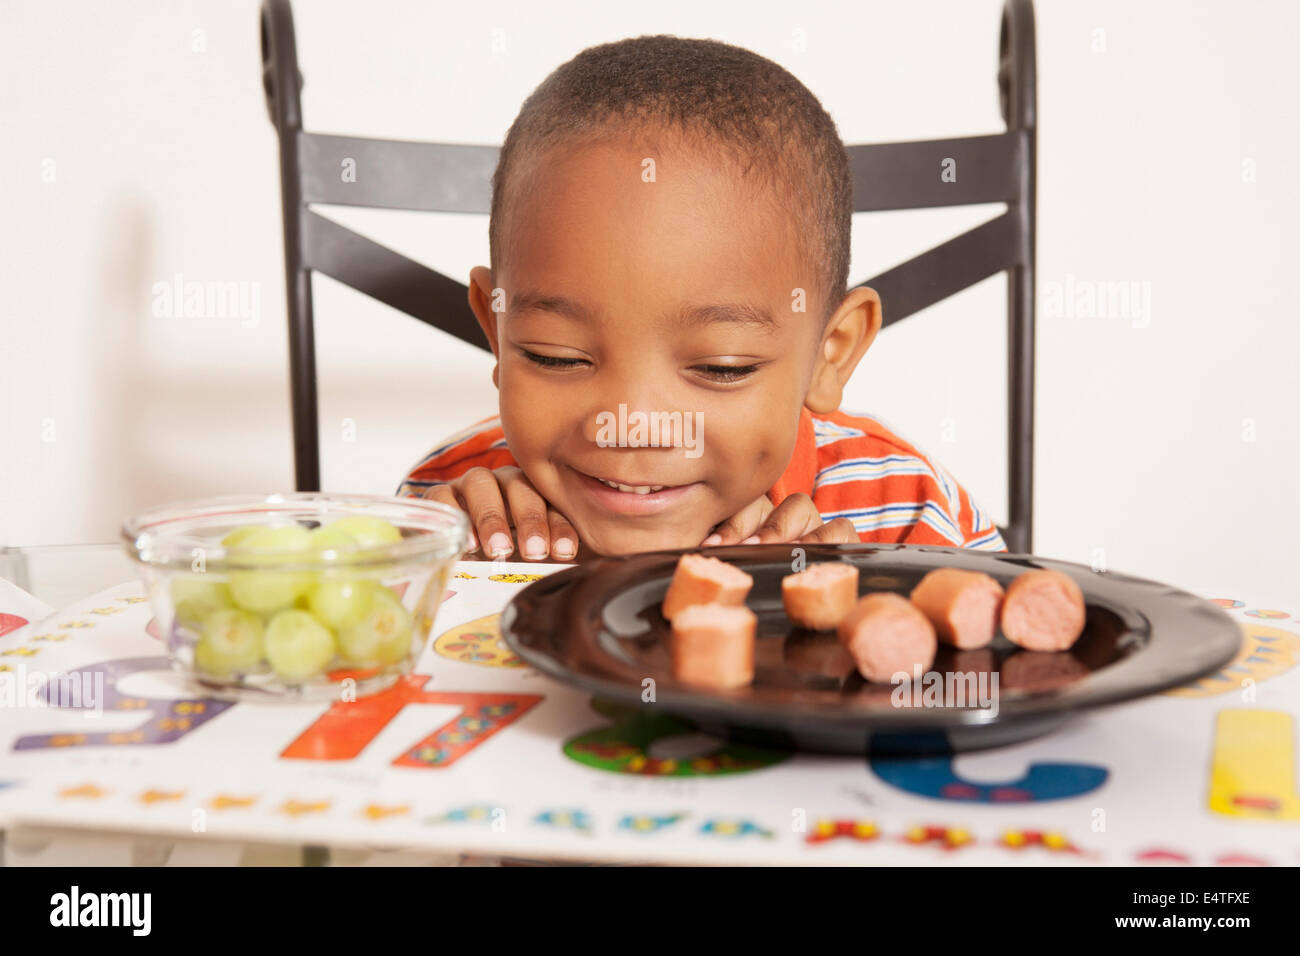 Boy Excited for Lunch, Sitting at Kitchen Table Stock Photo